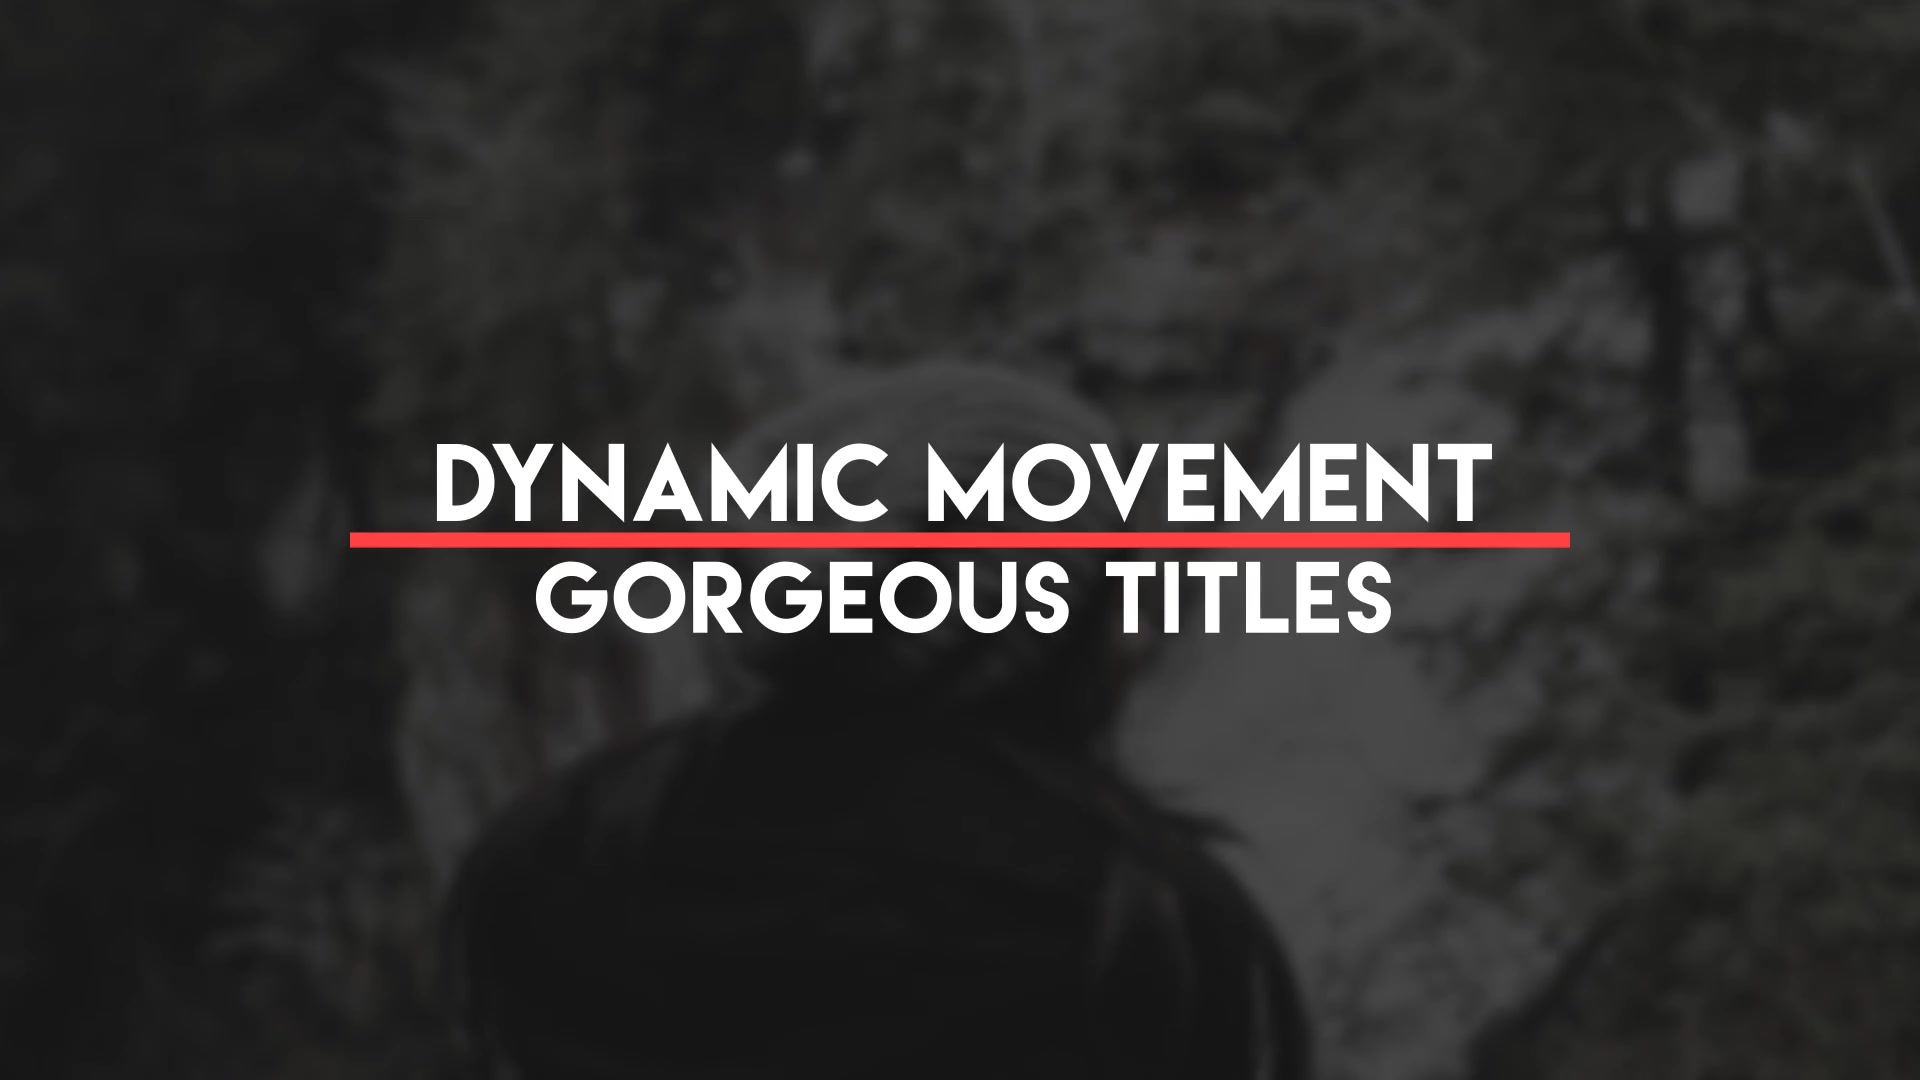 35 Titles - Download Videohive 19075733